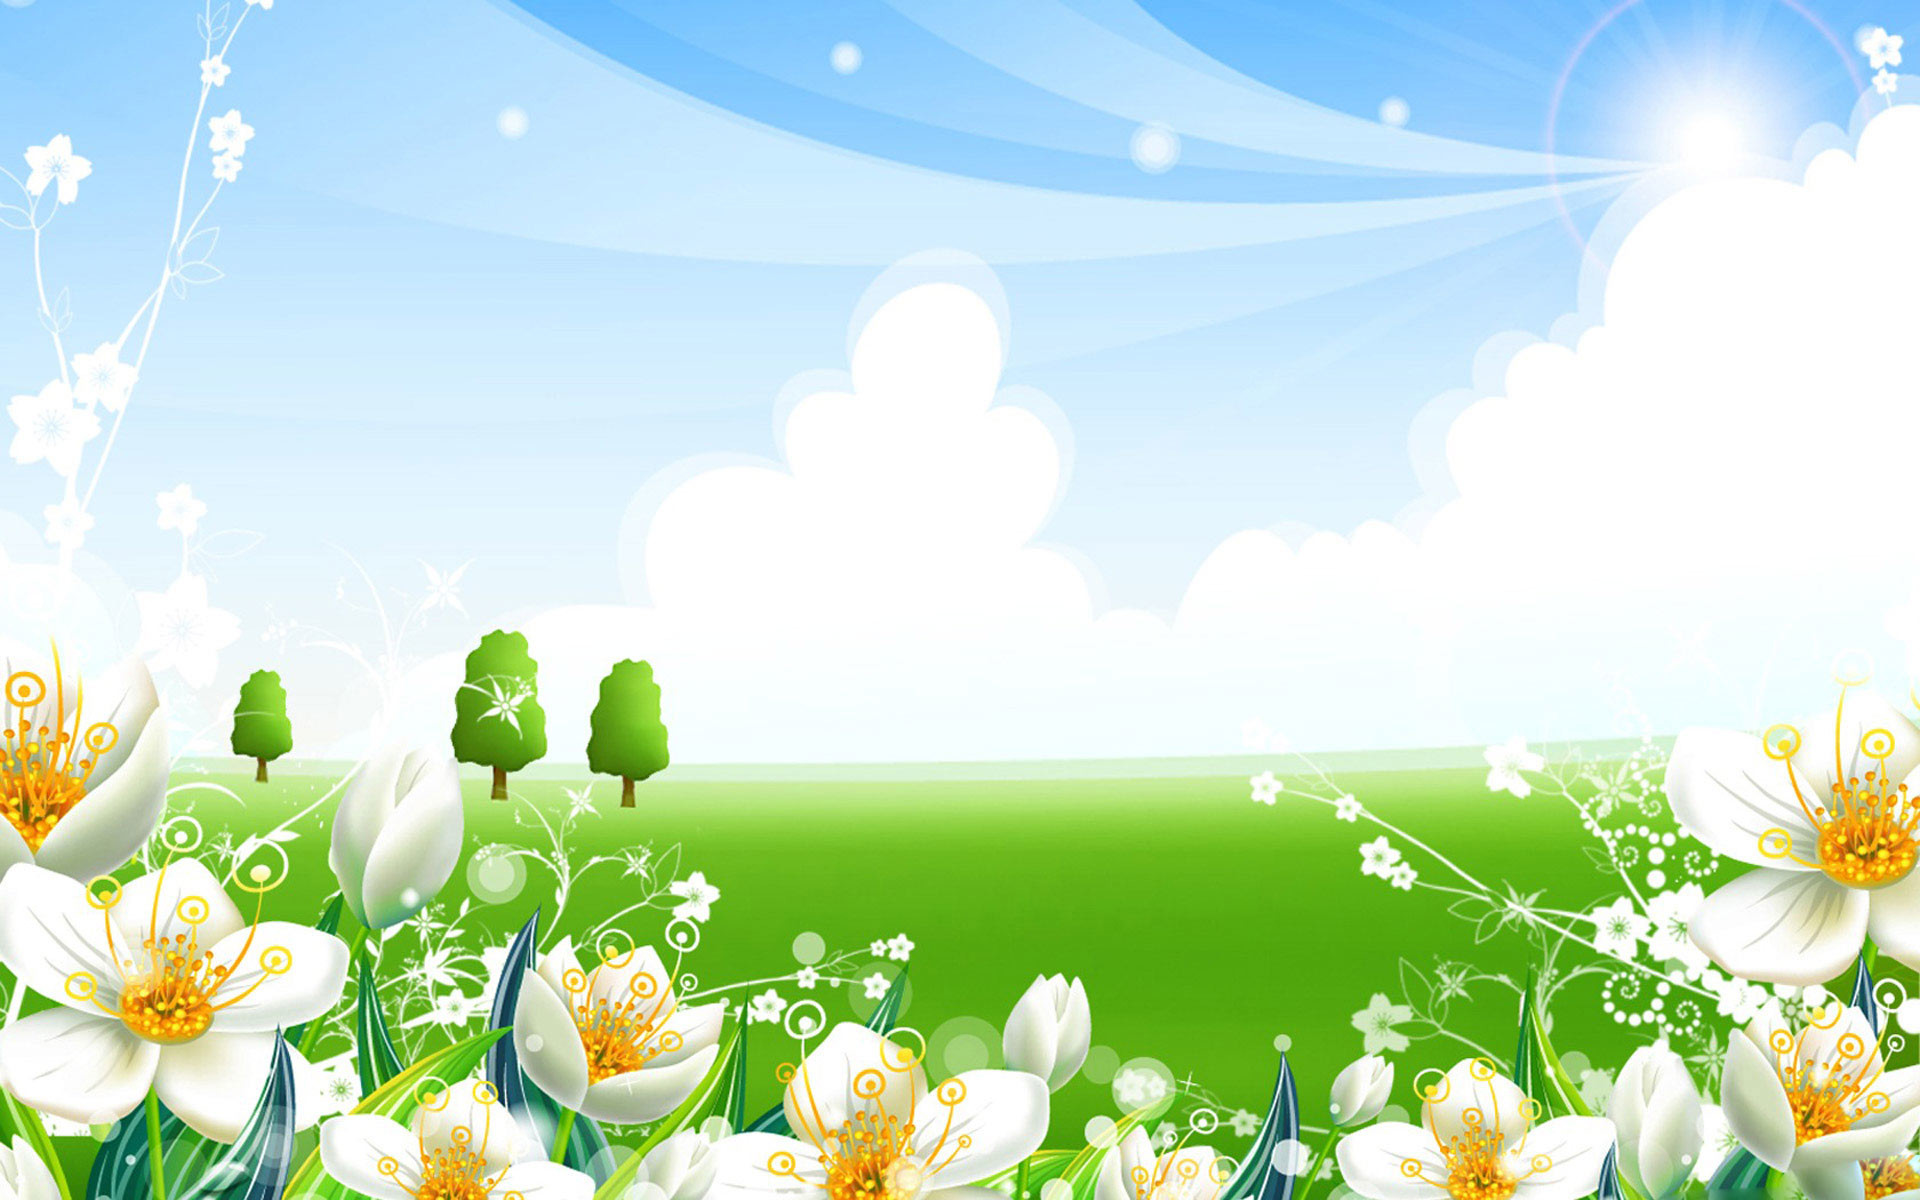 1920x1200 Blue and green summer theme HD wallpaper in high resolution